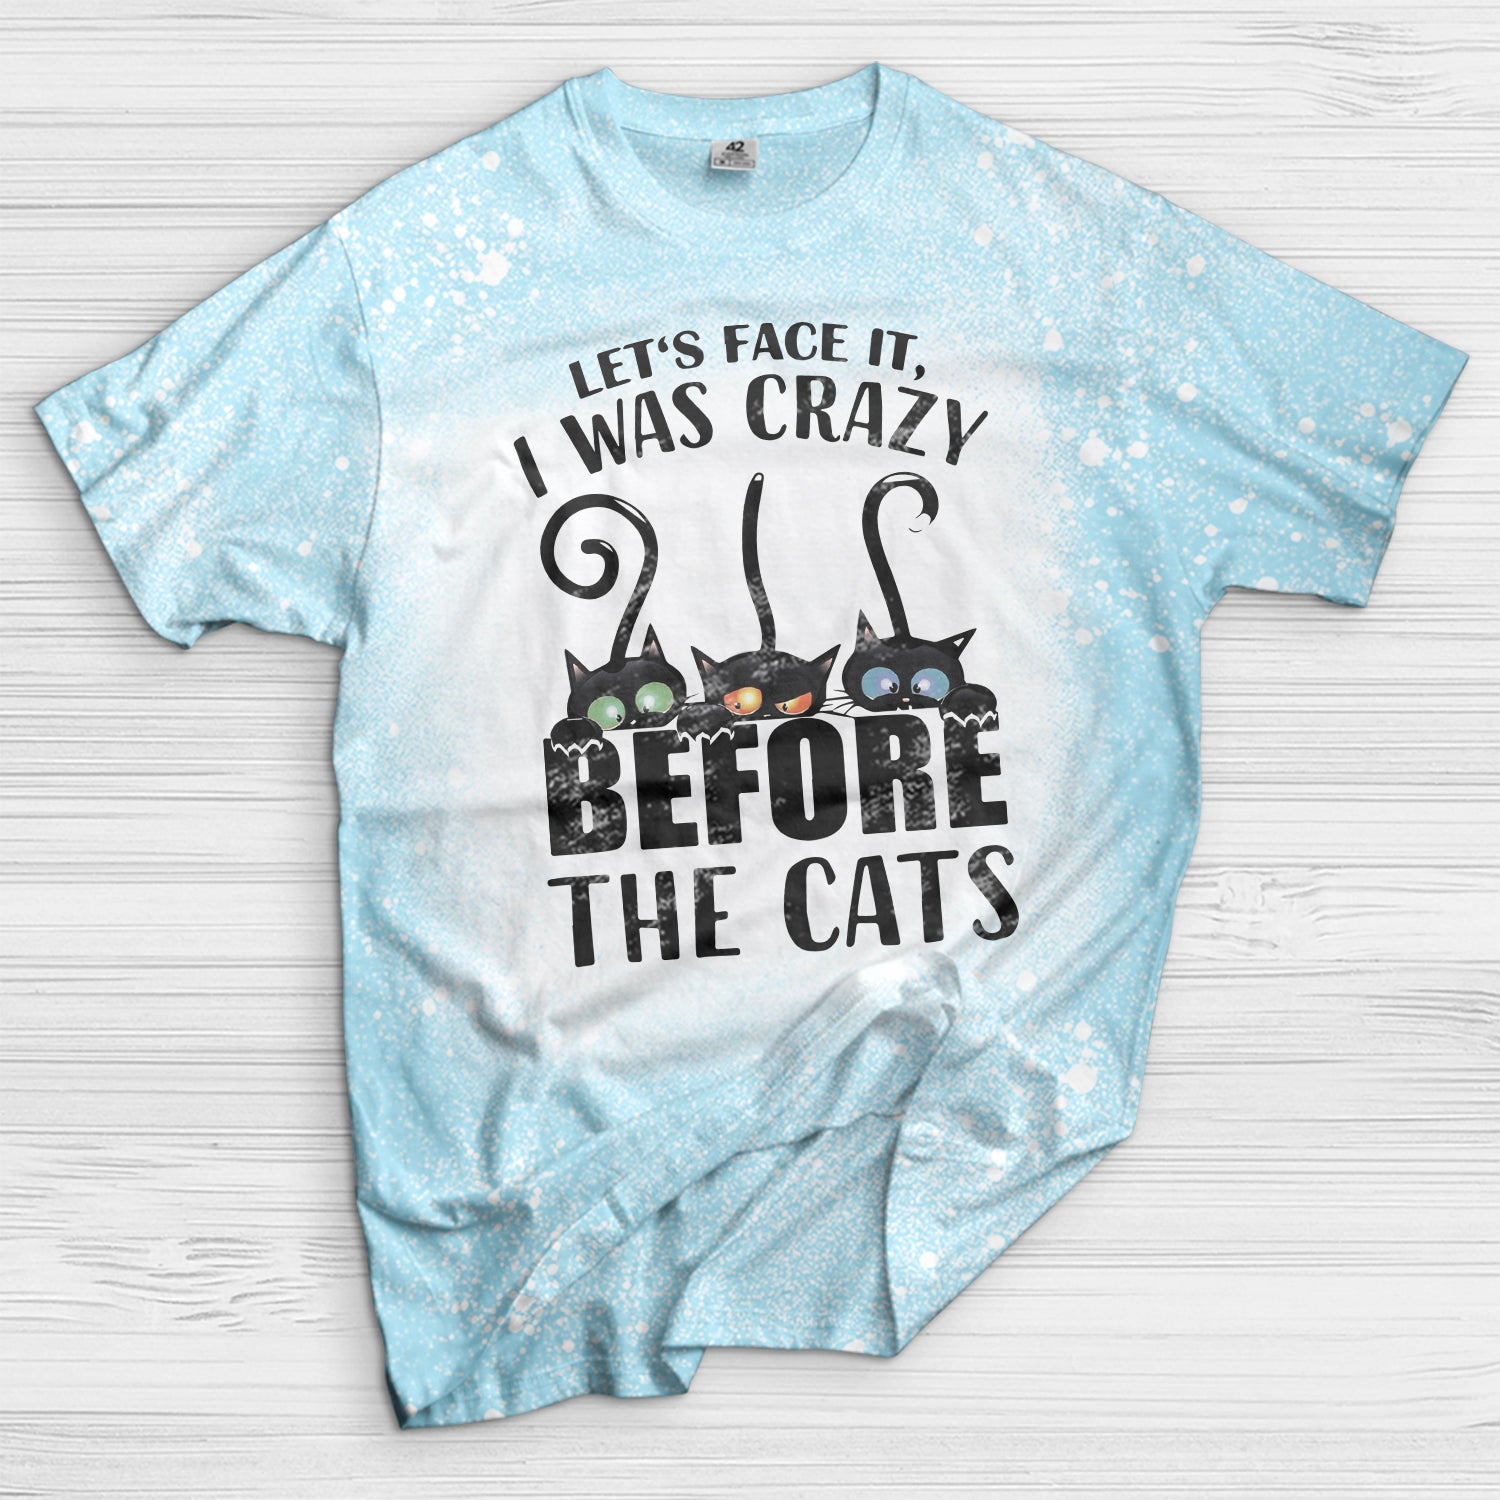 The Cats Crazy Bleached T-Shirt